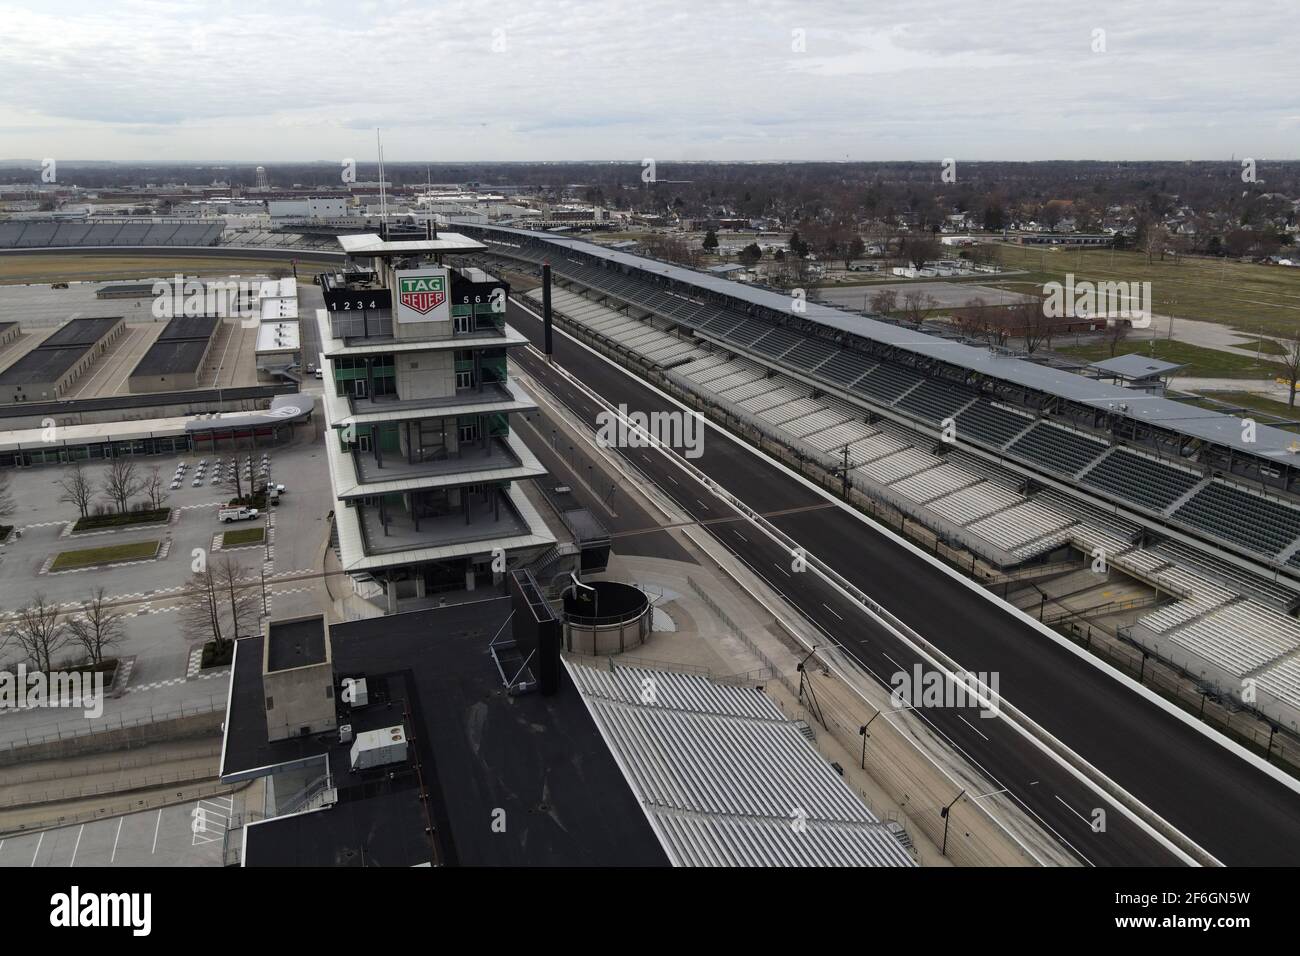 An aerial view of the finish line and Panasonic Pagoda at the Indianapolis Motor Speedway, Monday, March 22, 2021, in Speedway, Ind. It is the home of Stock Photo